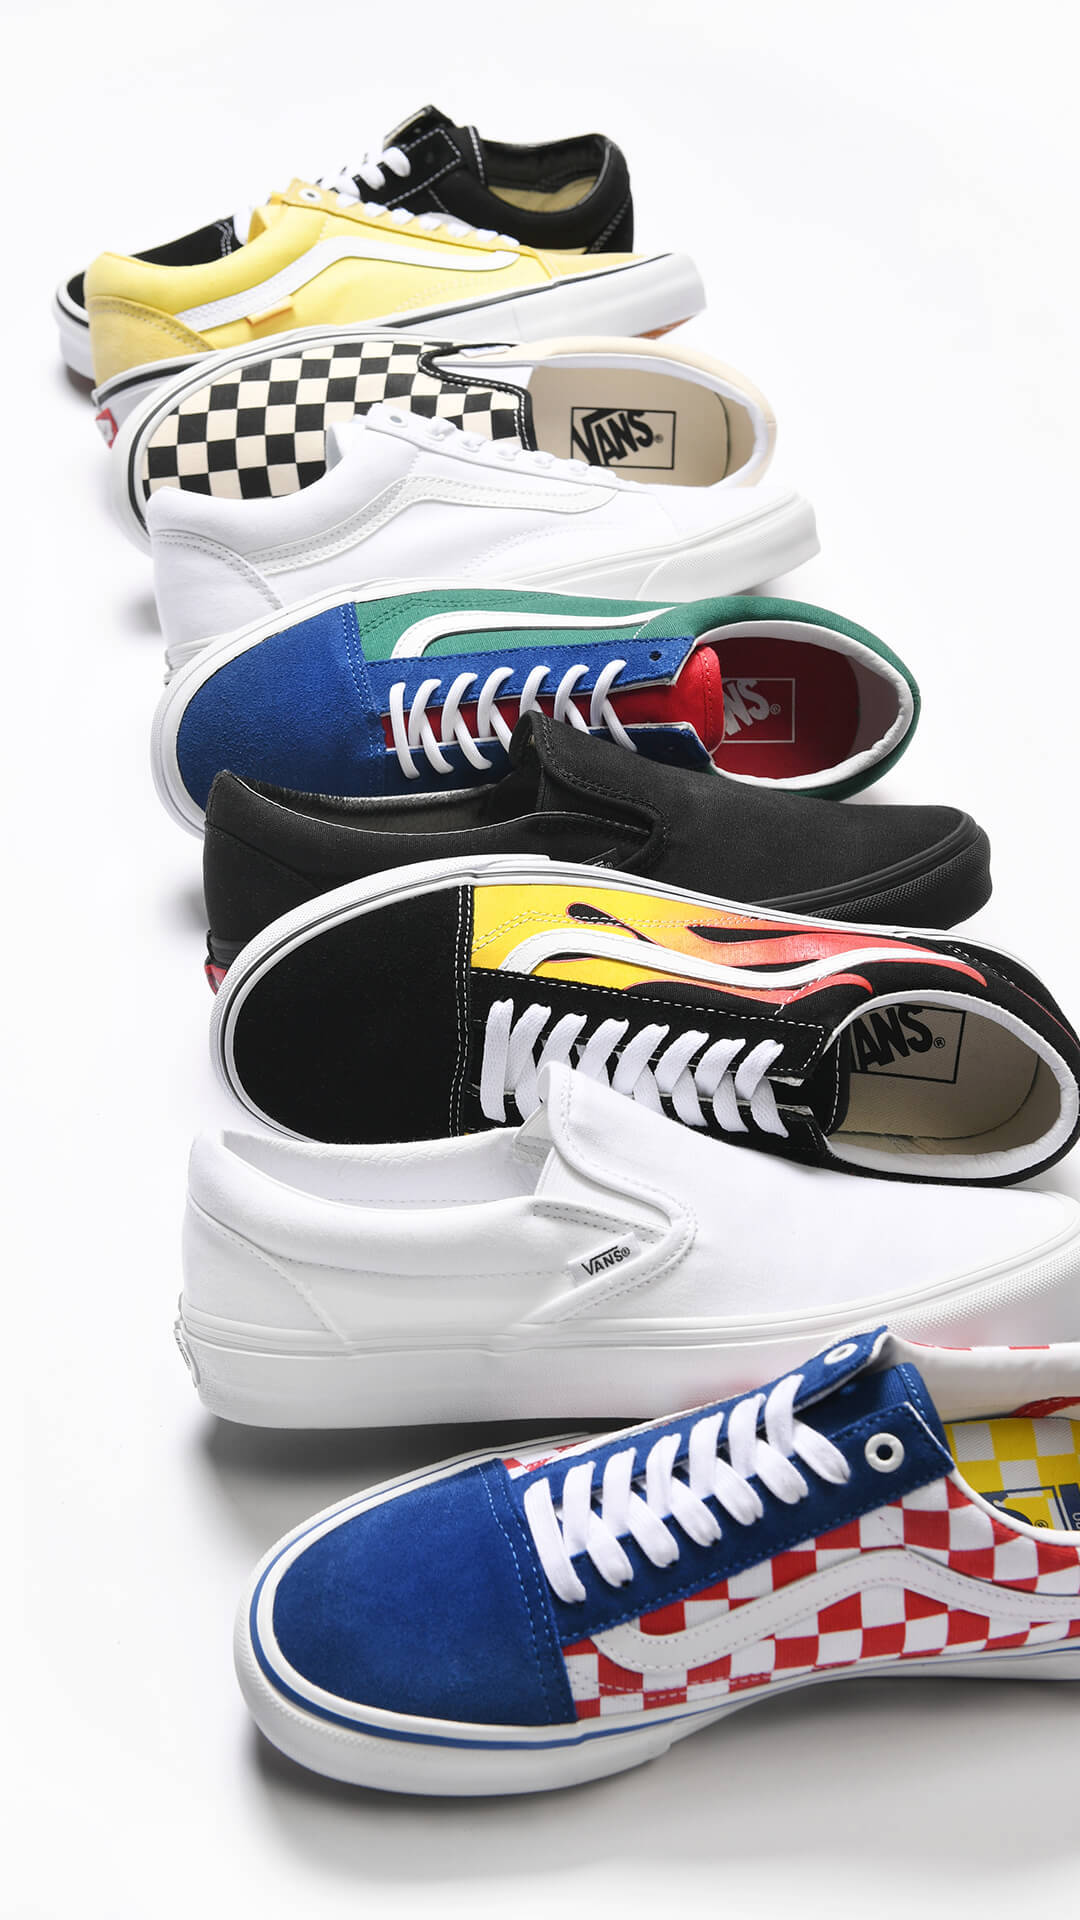 NEW ARRIVAL VANS SHOES FOR EVERYONE ON YOUR LIST